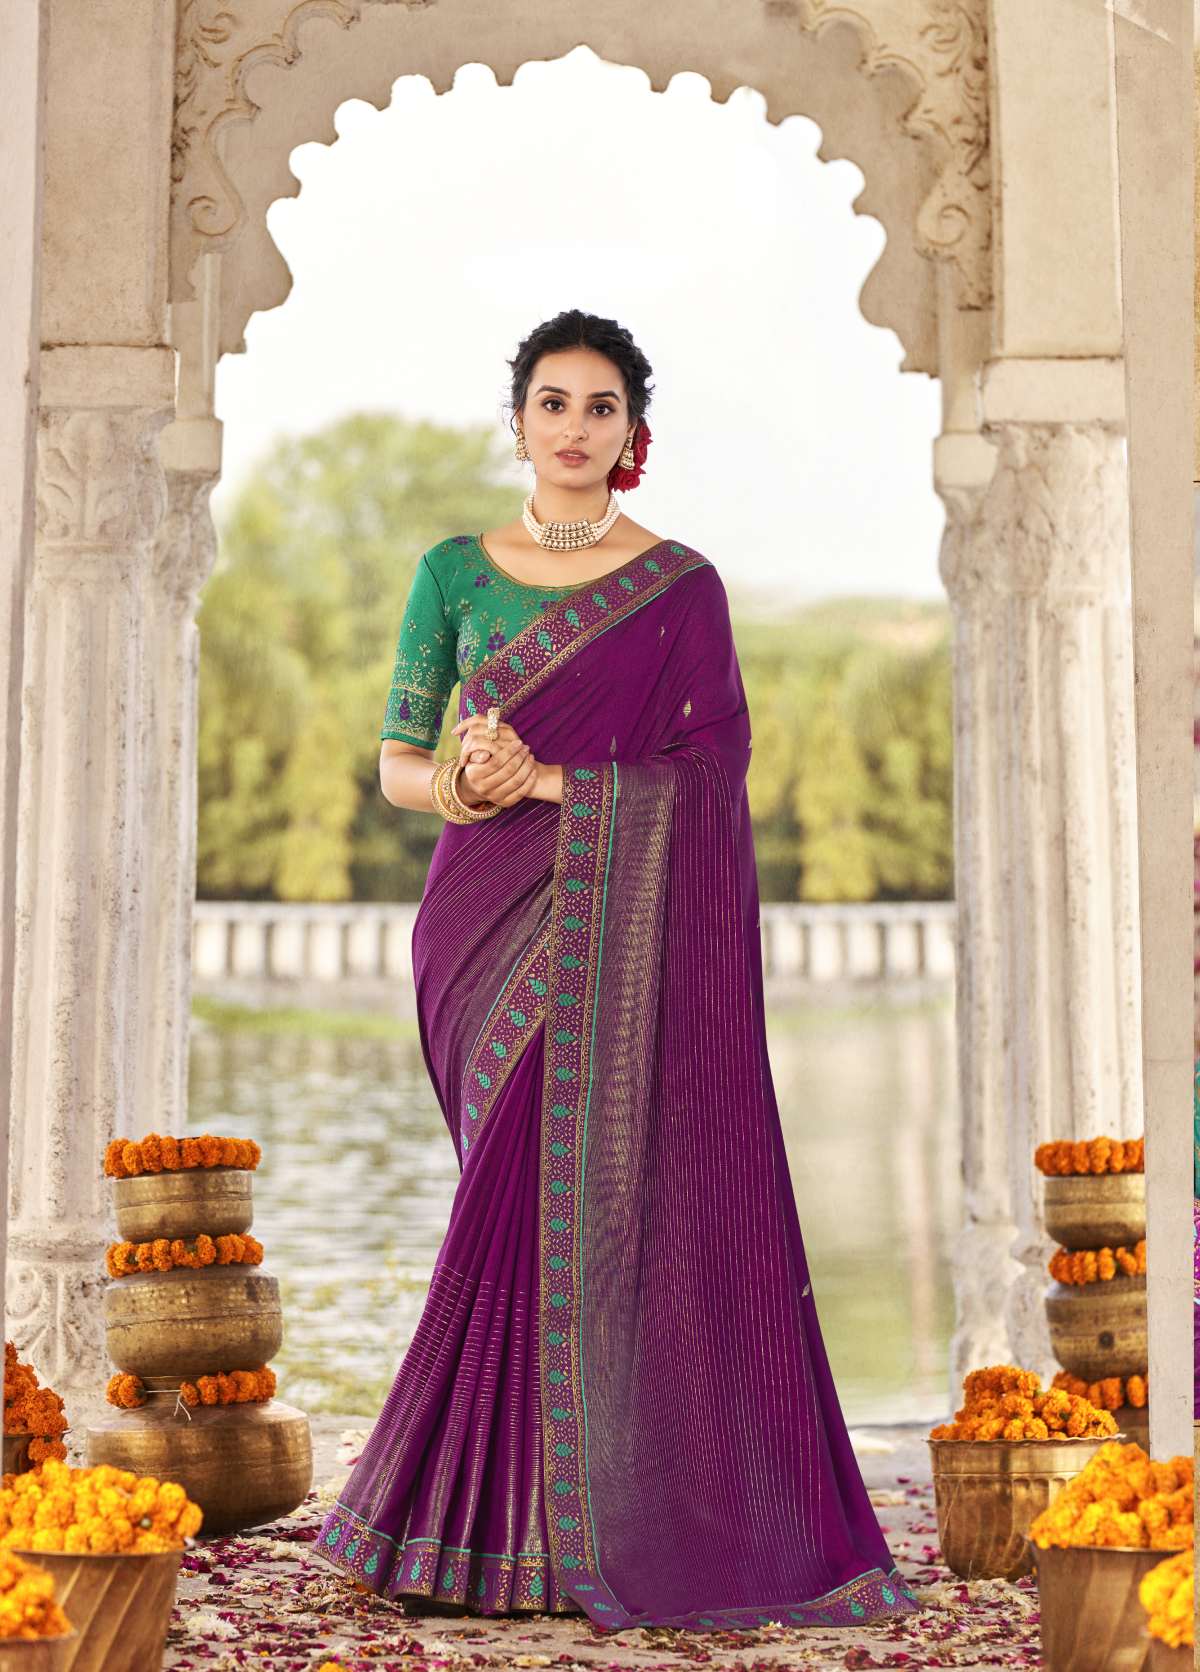 Latest Designer Party Wear Saree For Women Sarees New Collection 2023 Saree  Below 500 Rupees New